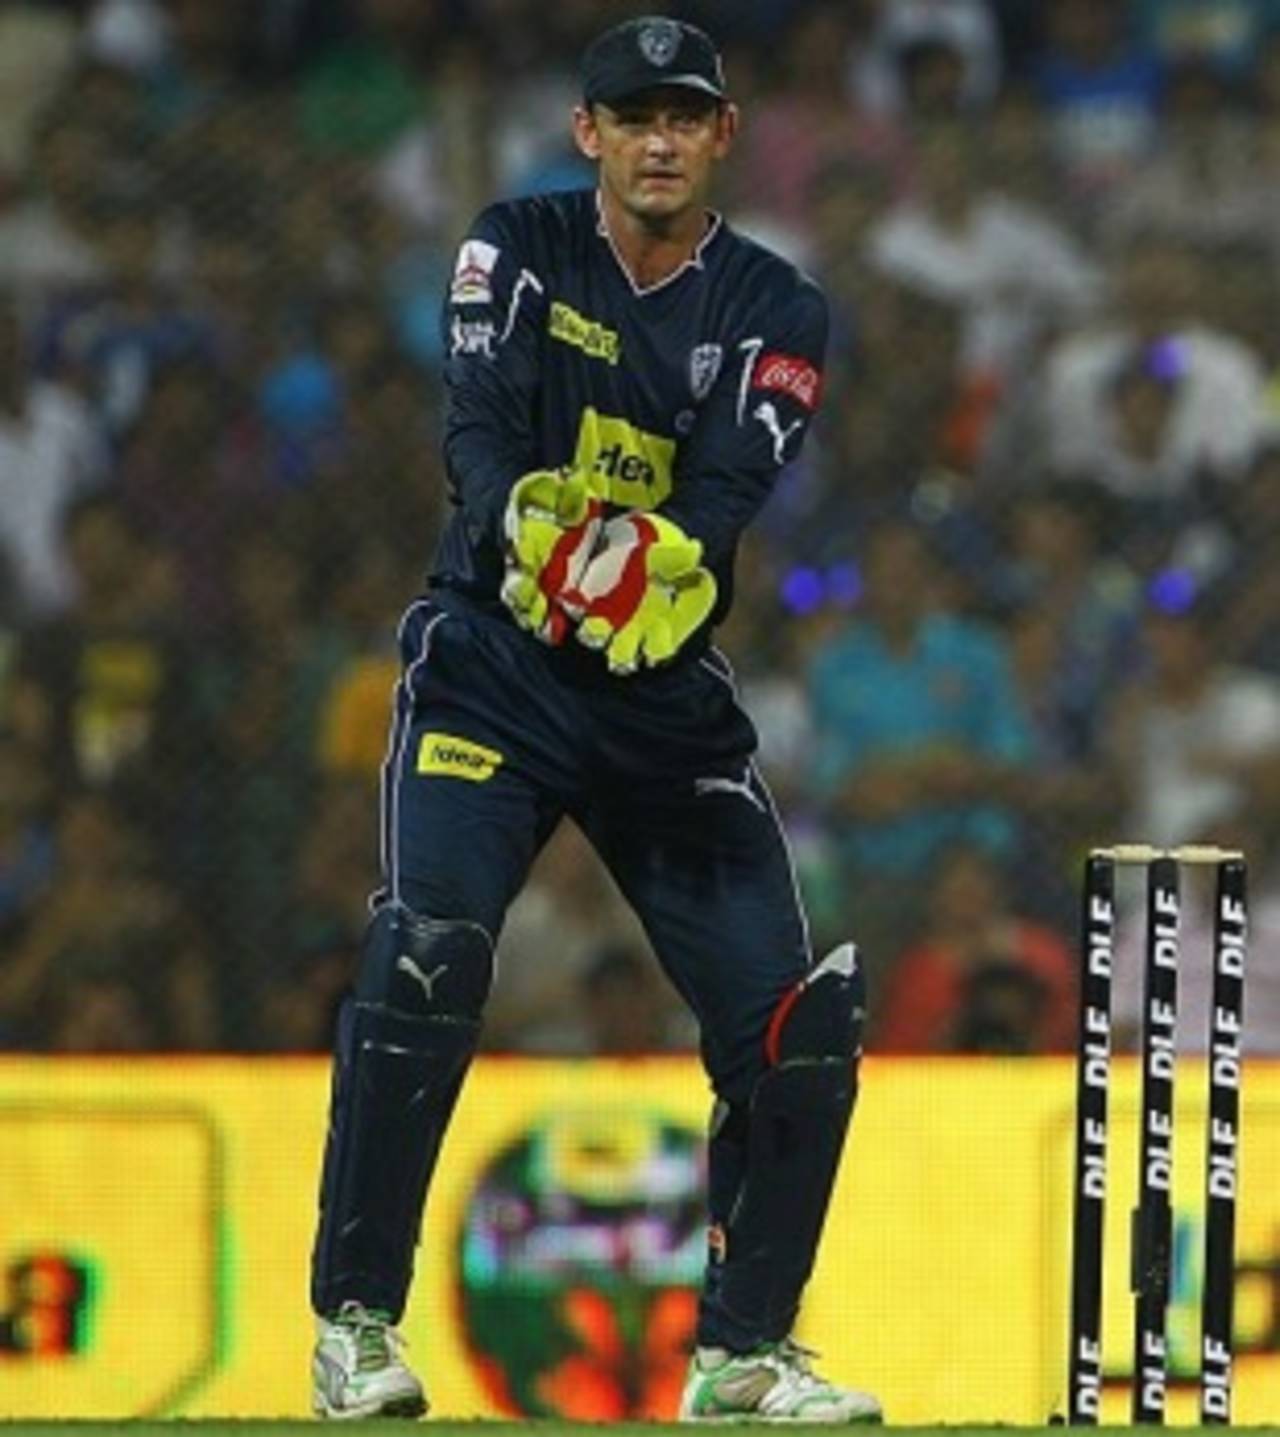 Adam Gilchrist believes that while batting has become important for wicketkeepers, their skills behind the stumps have not diminished&nbsp;&nbsp;&bull;&nbsp;&nbsp;Indian Premier League